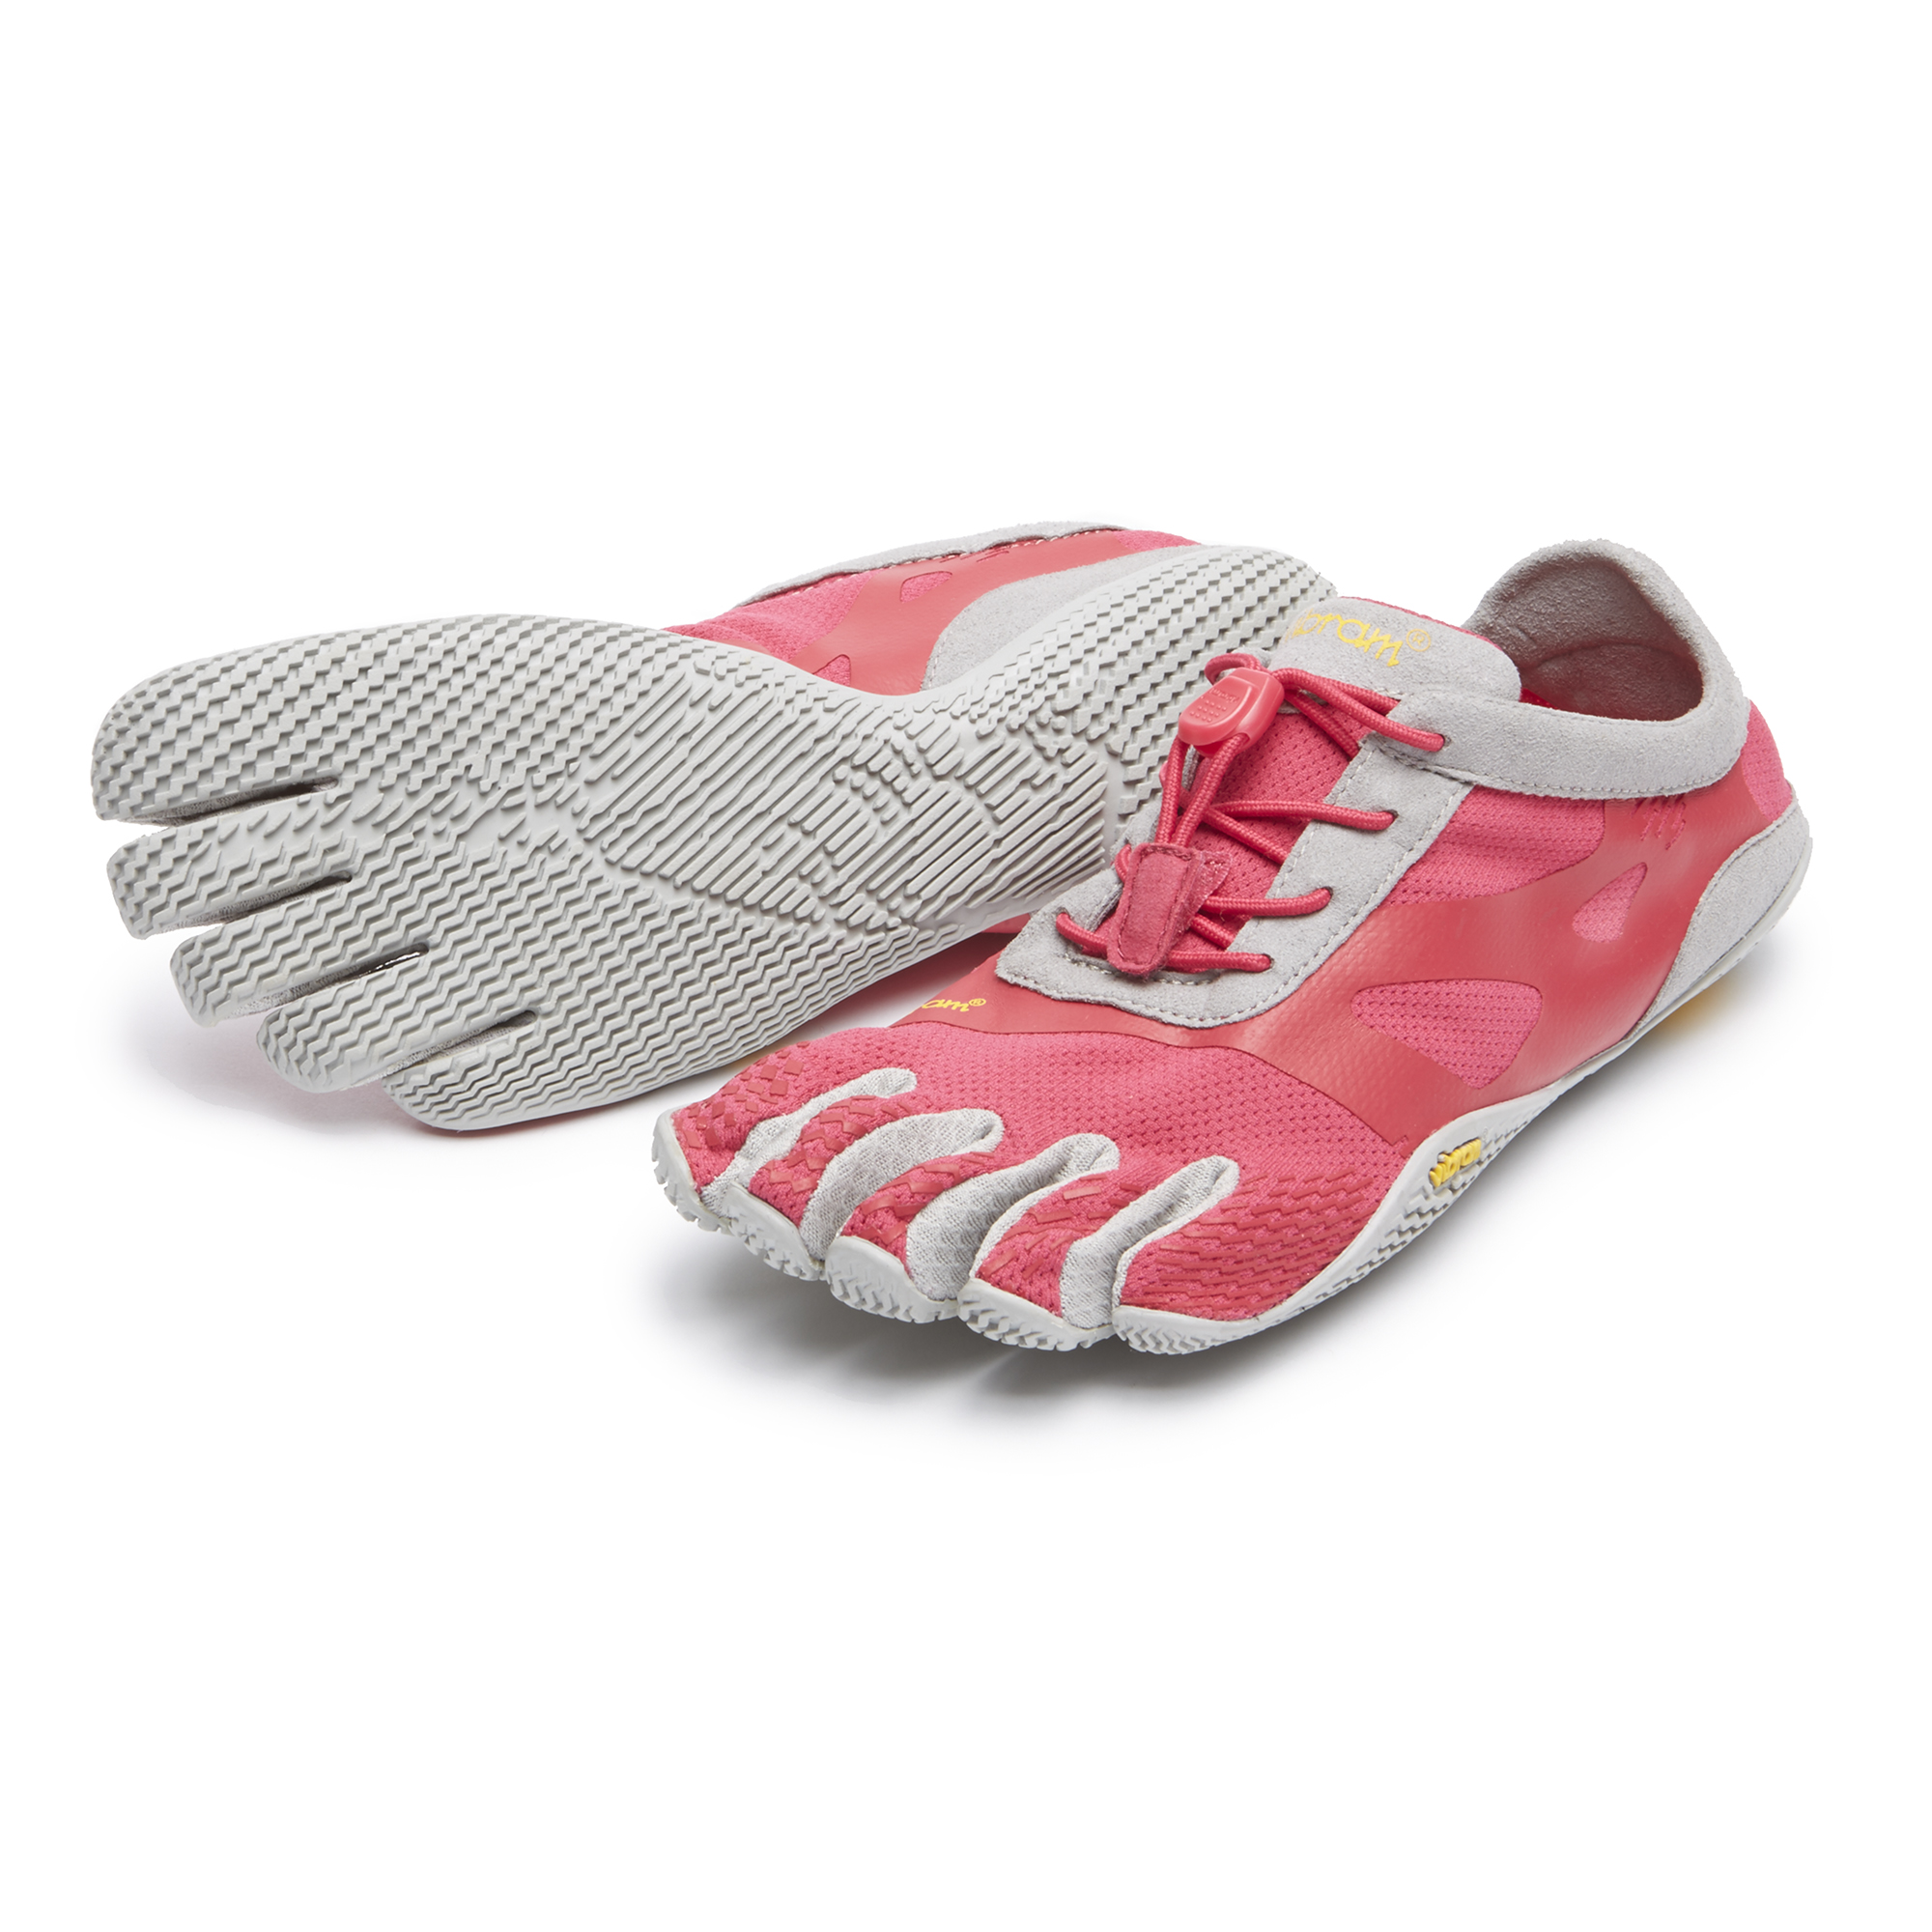 Women's Fitness and Wellbeing 7.5/8 UK|Grey Taupe Details about   Vibram Five Fingers Kso 